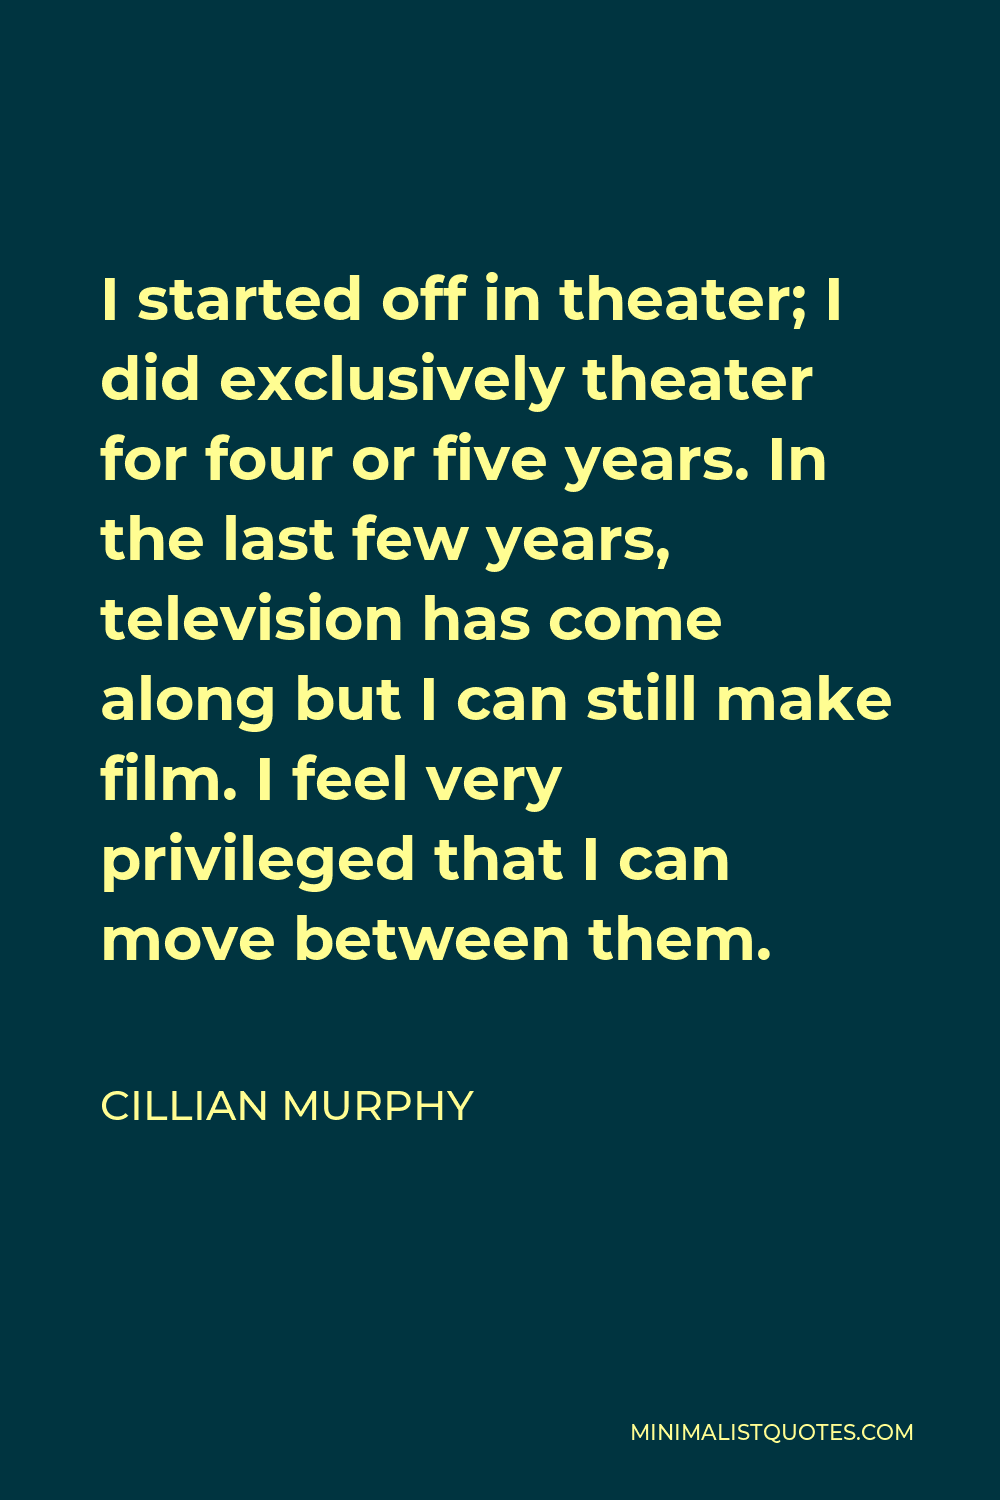 Cillian Murphy Quote - I started off in theater; I did exclusively theater for four or five years. In the last few years, television has come along but I can still make film. I feel very privileged that I can move between them.